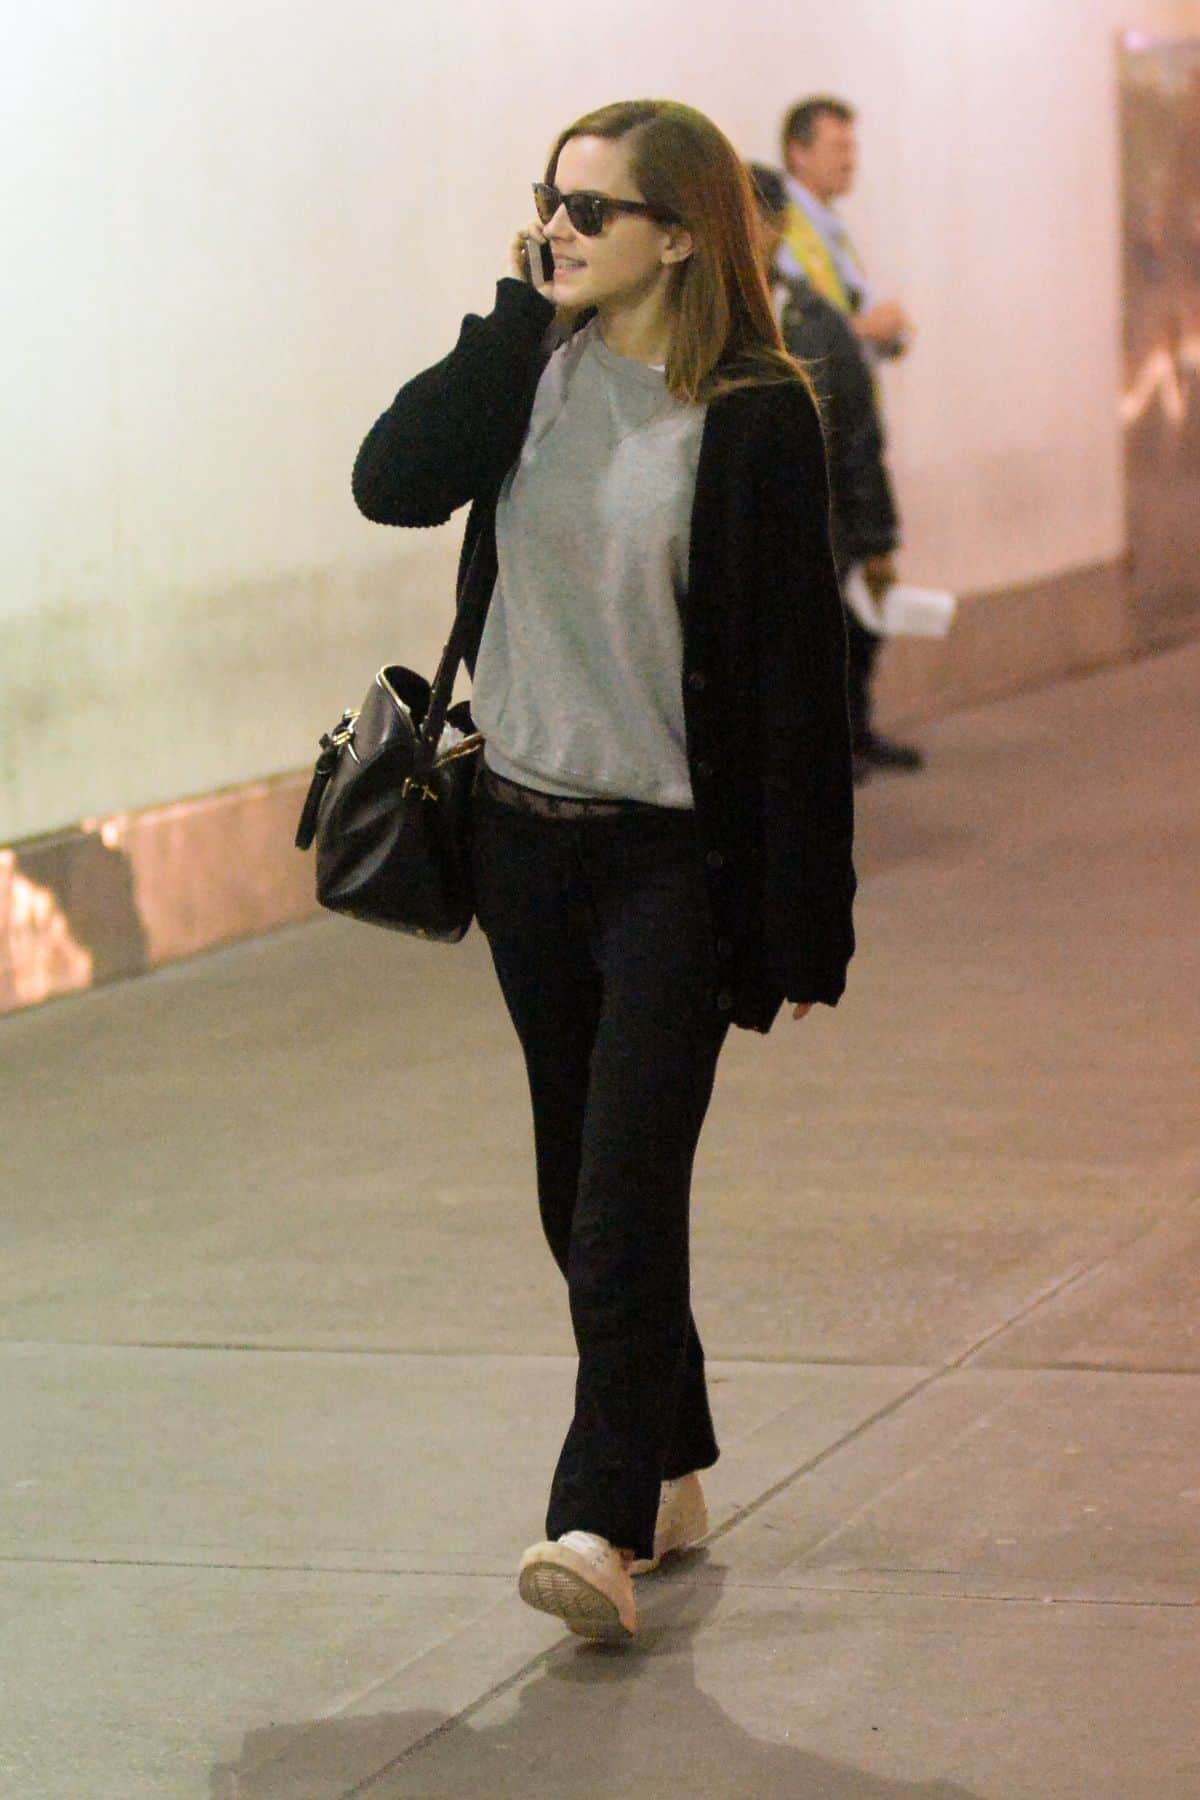 Emma Watson in a Comfy Outfit Exposing her Lace Underwear at JFK Airport